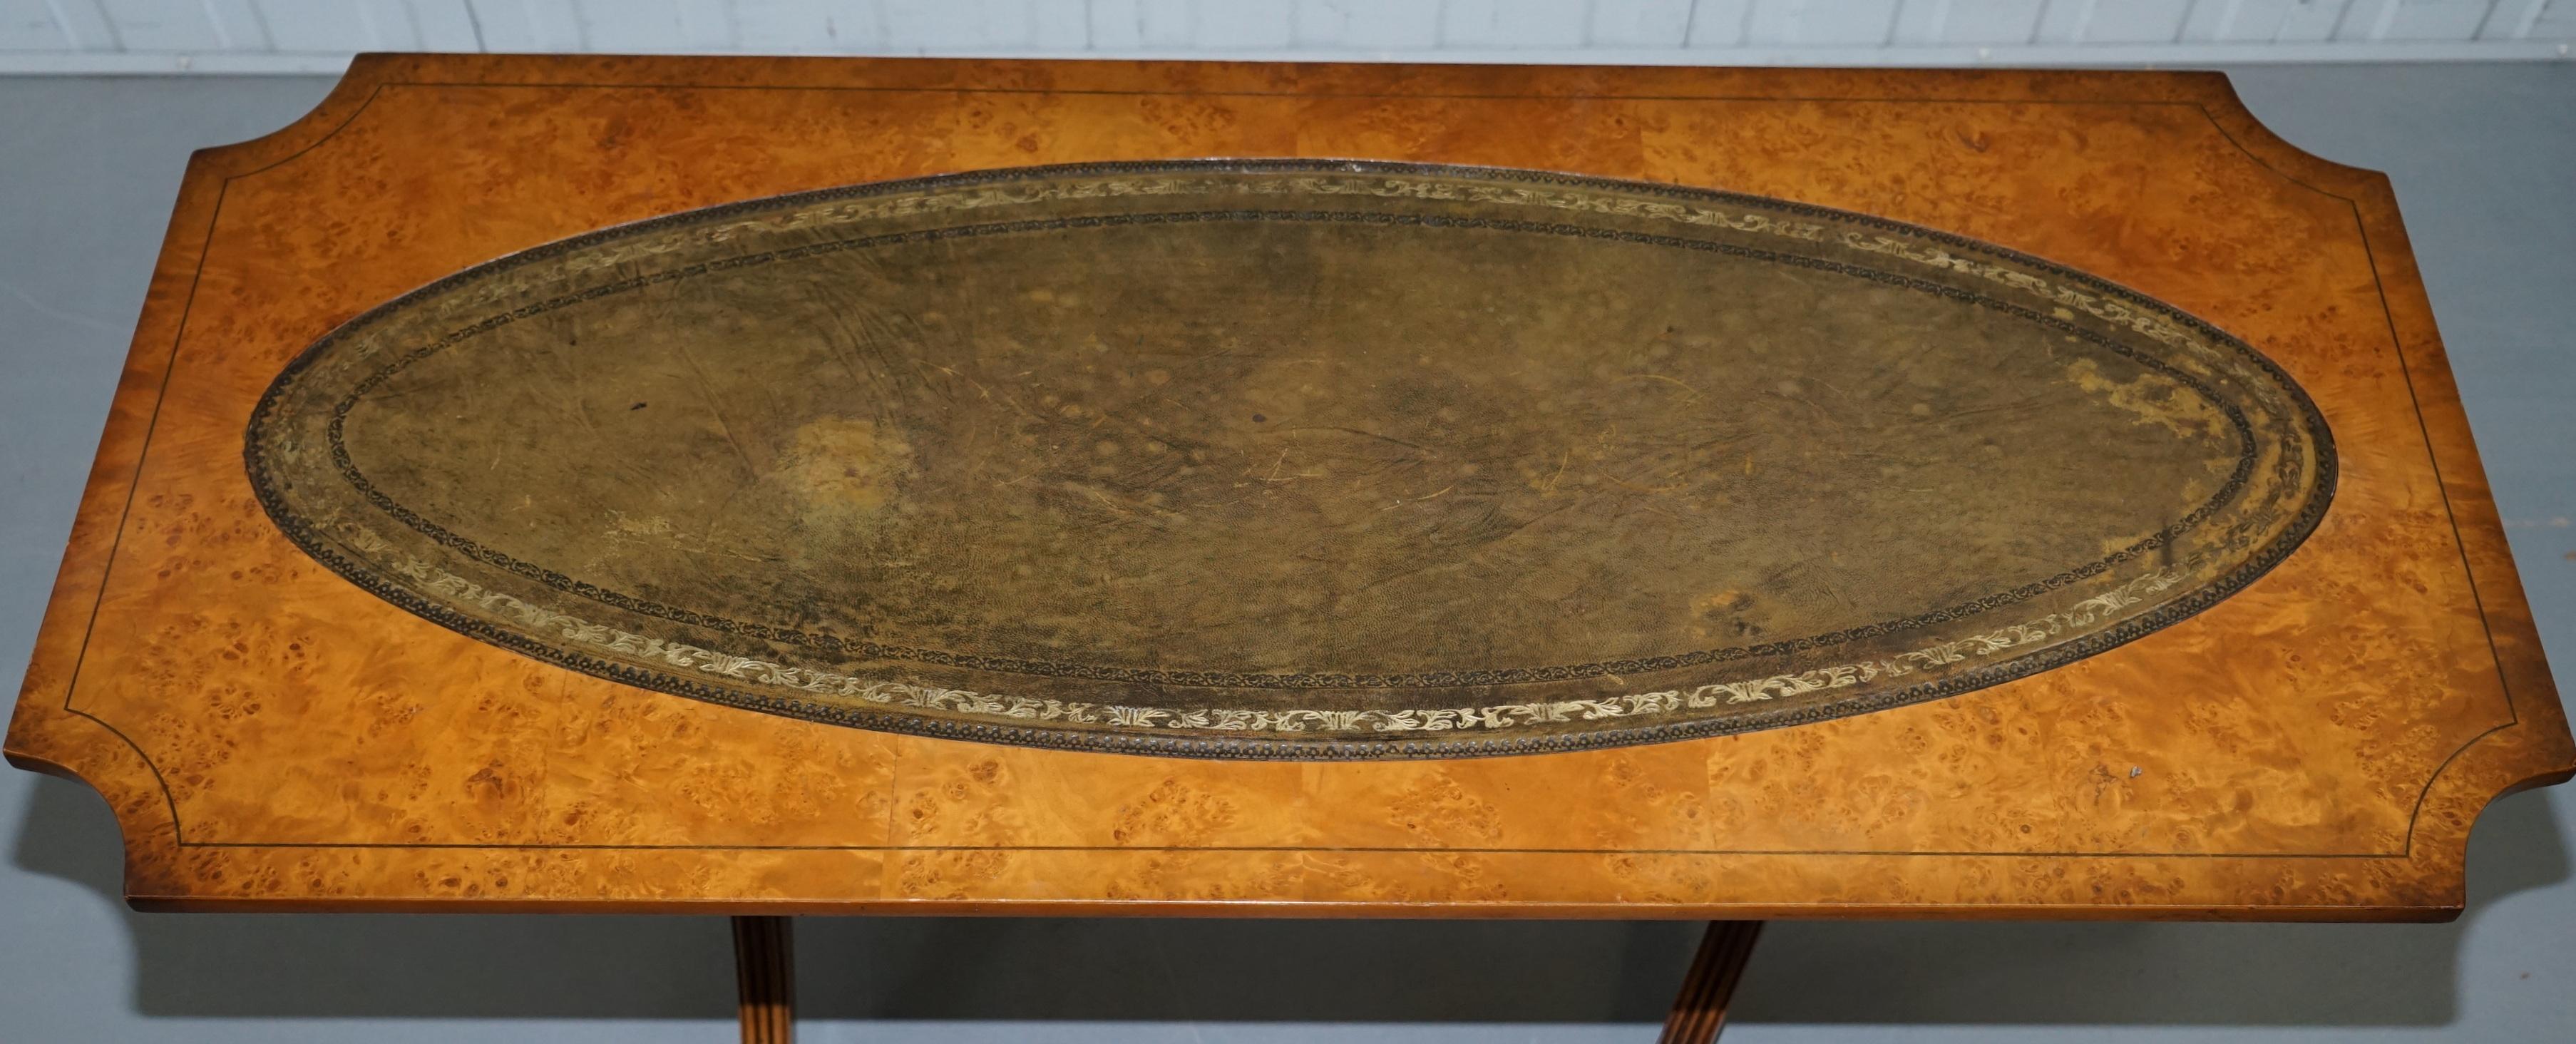 Hand-Carved Vintage Burr Walnut Coffee Table with Green Distressed Leather Top Lovely Patina